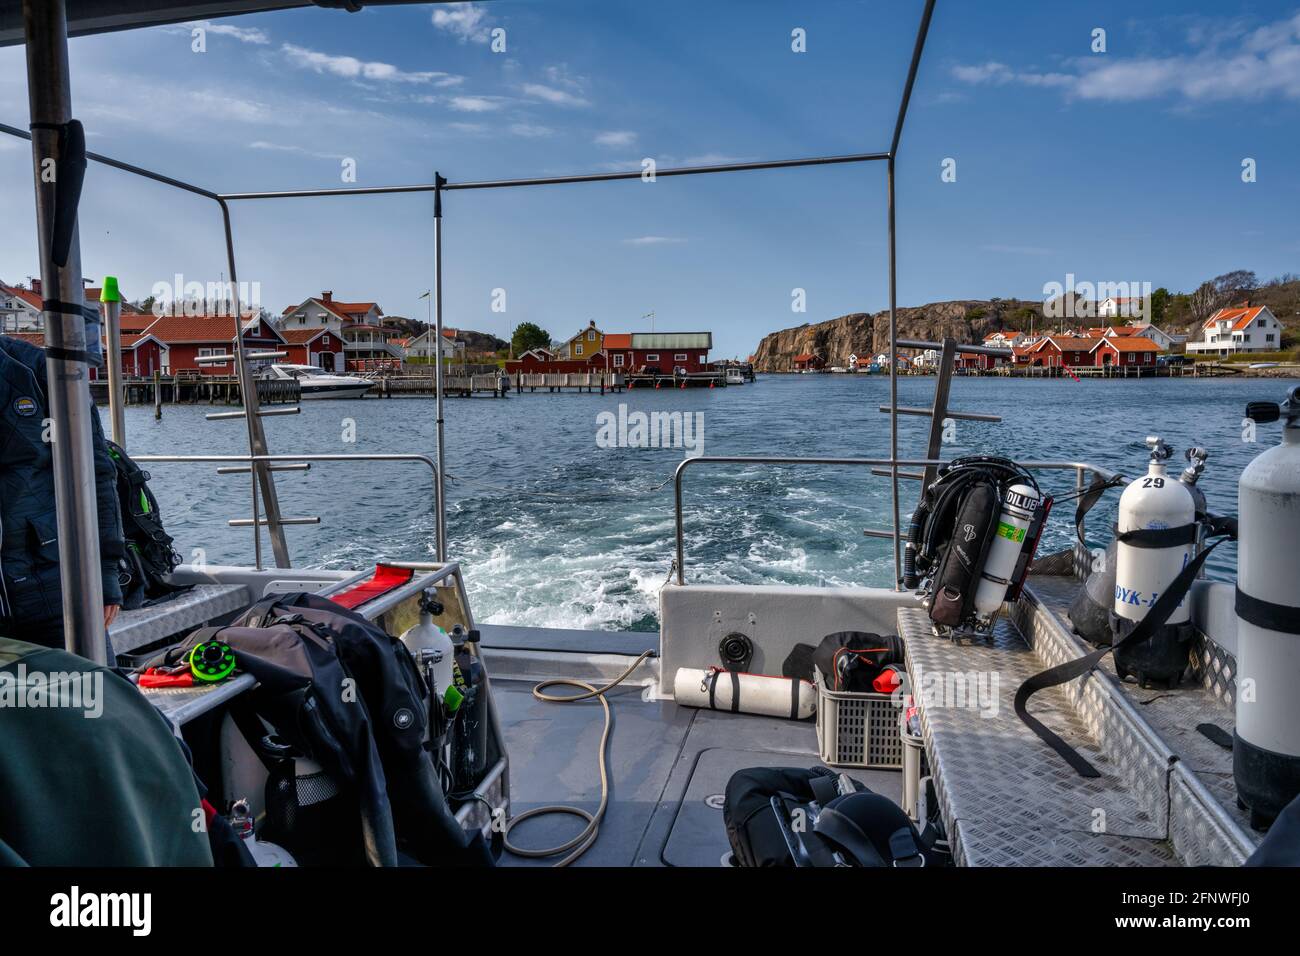 April 17, 2021 - Hamburgsund, Sweden: This picturesque fishing village on the Swedish West coast are seen from the deck of a dive boat. Traditional red sea huts and a blue sky in the background Stock Photo